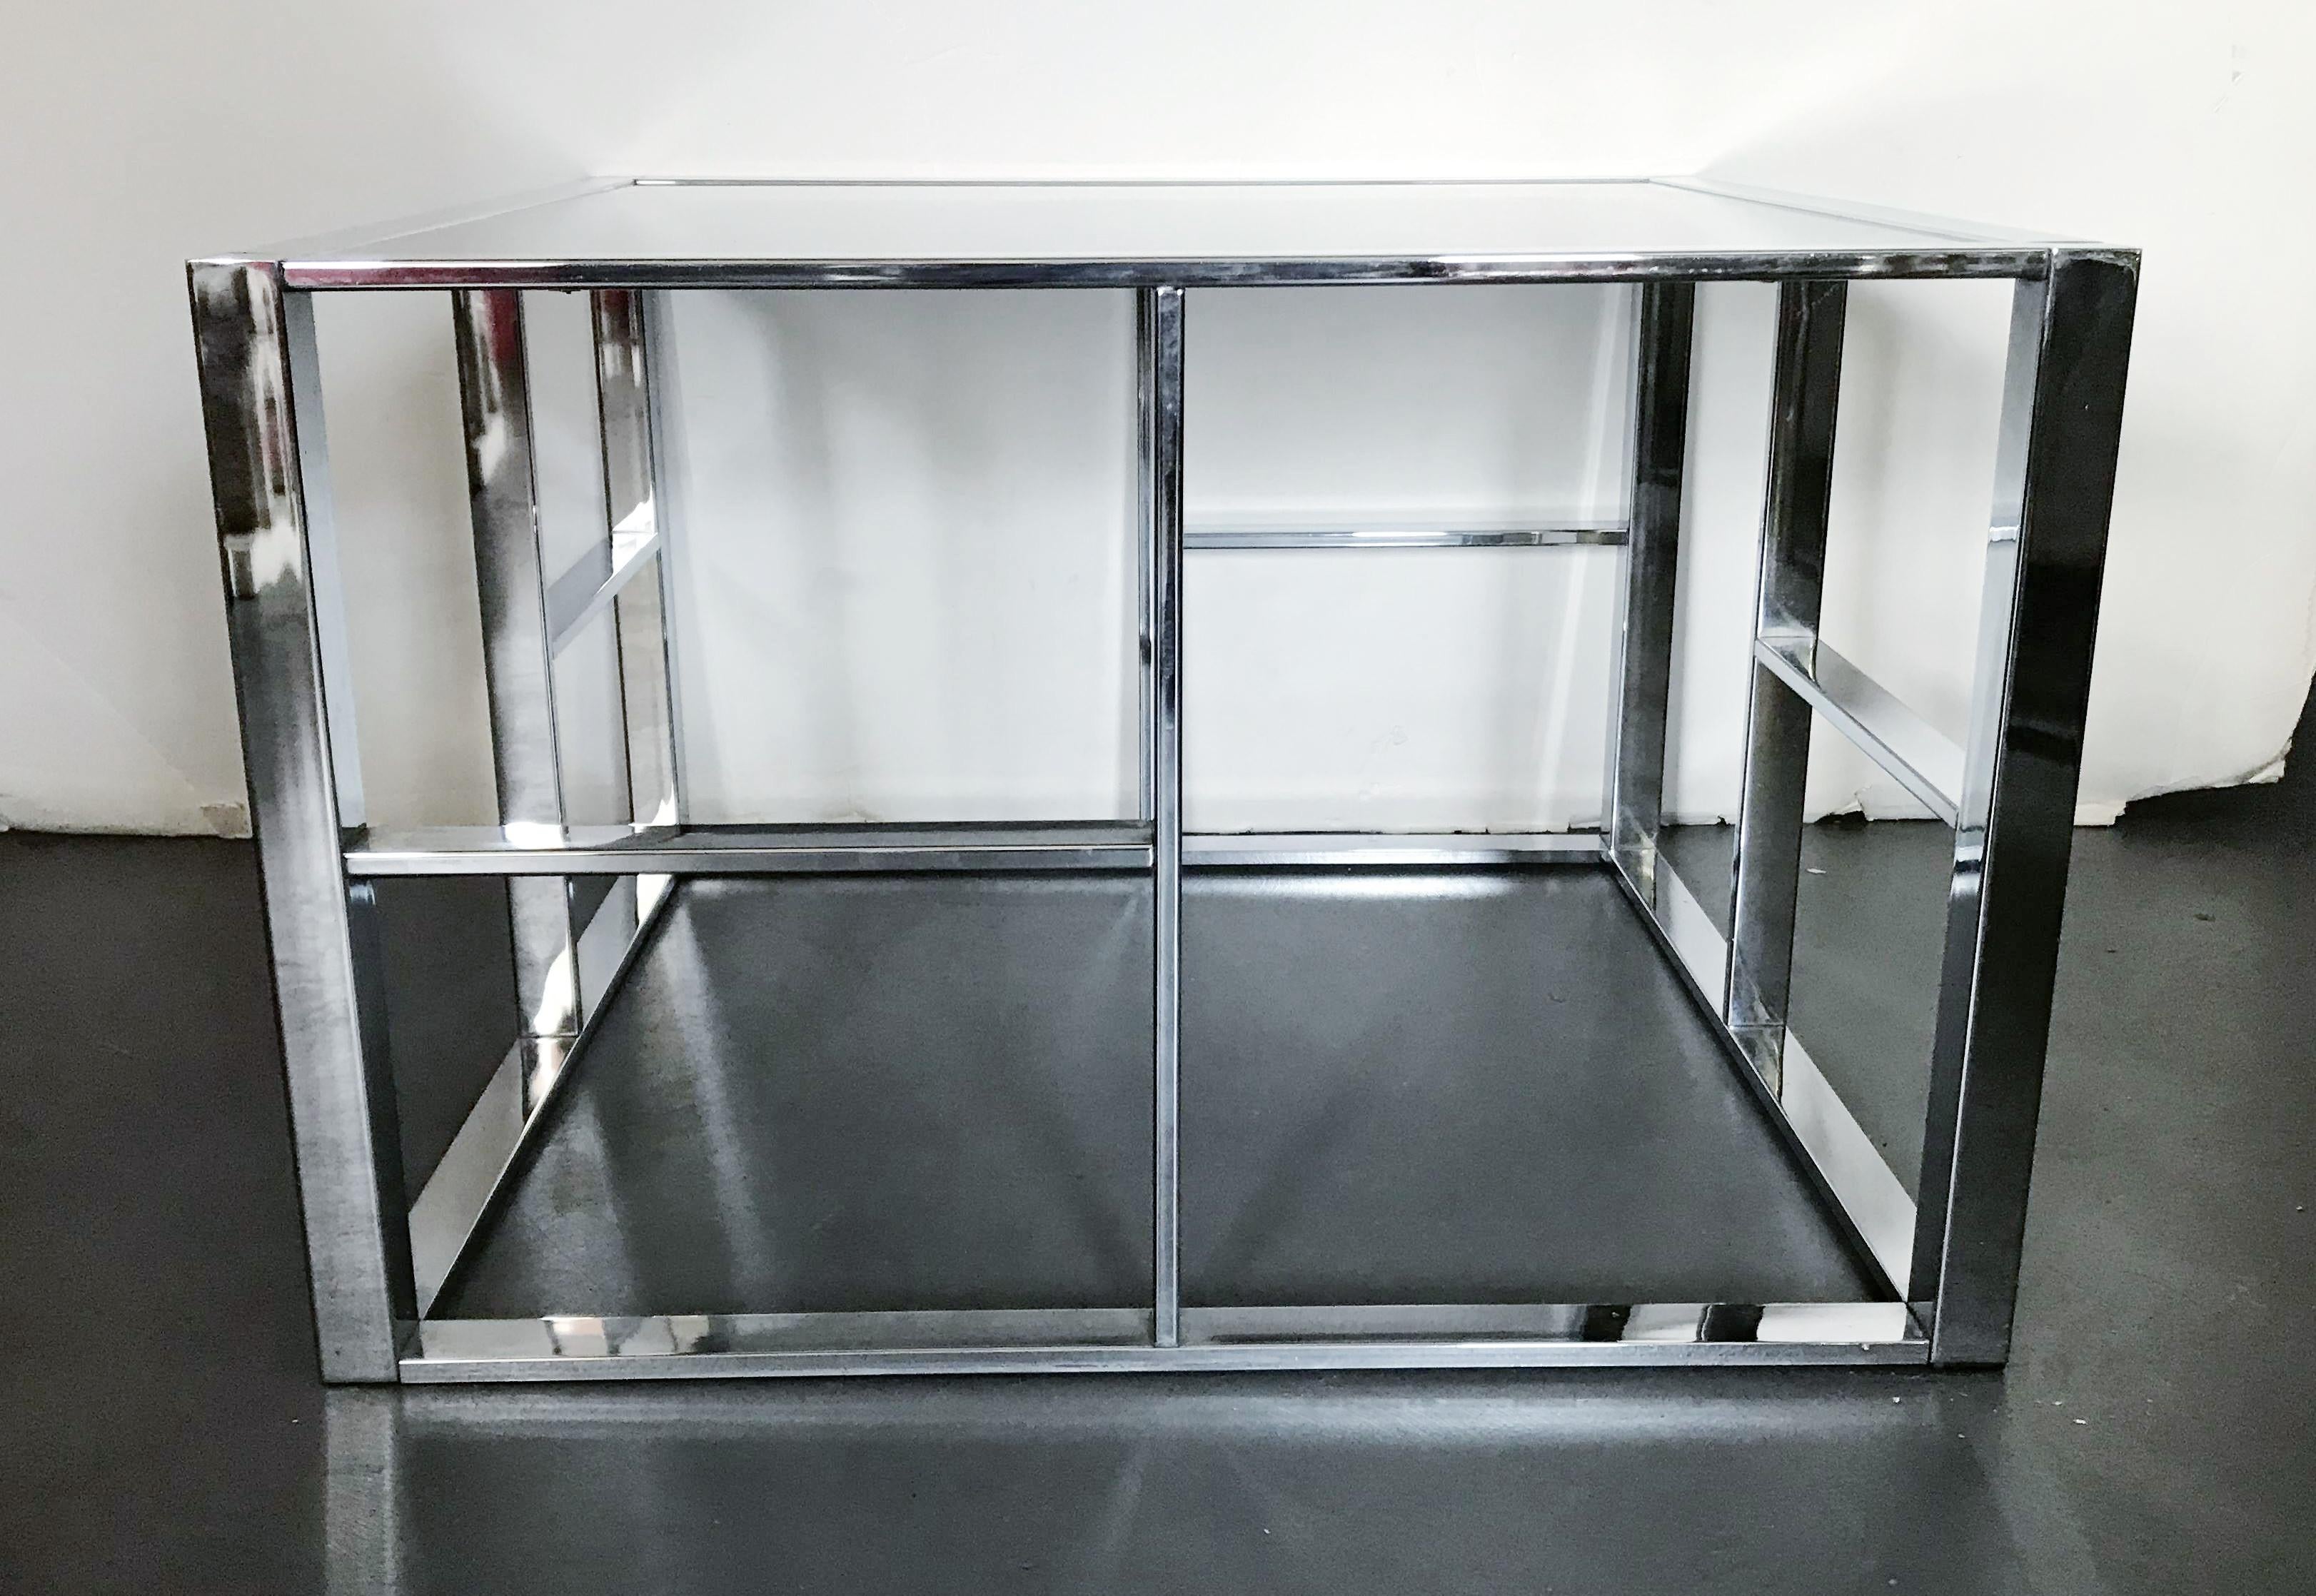 Vintage midcentury coffee or side table in Art Deco style, with geometric chrome frame and smoky glass top / Made in the USA circa 1970s
Measures: length 31 inches, width 31 inches, height 20 inches
1 available in stock in Palm Springs ON FINAL